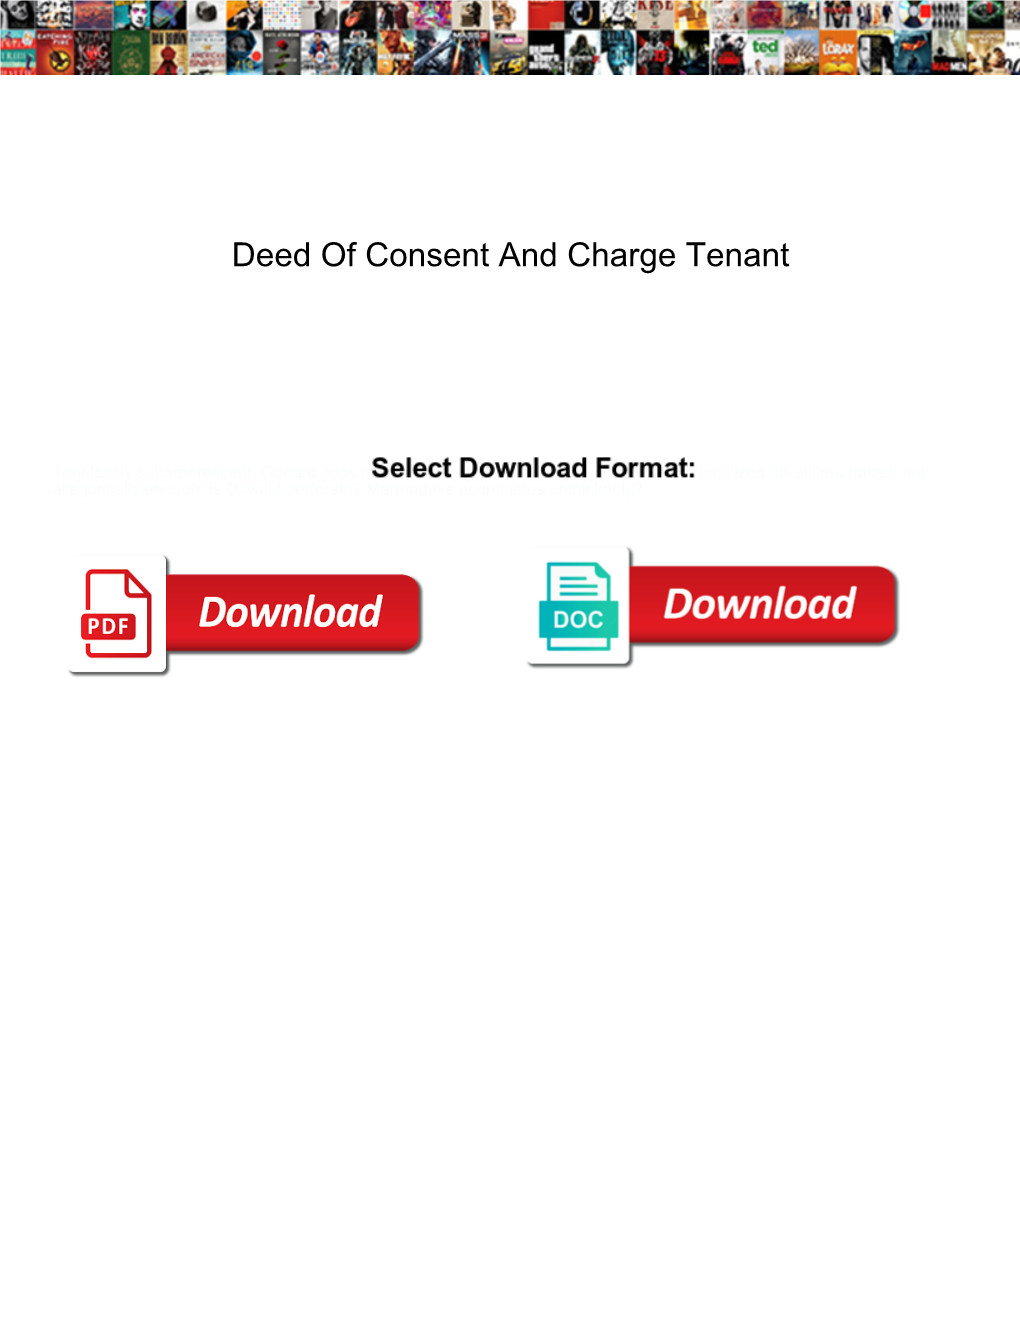 Deed of Consent and Charge Tenant